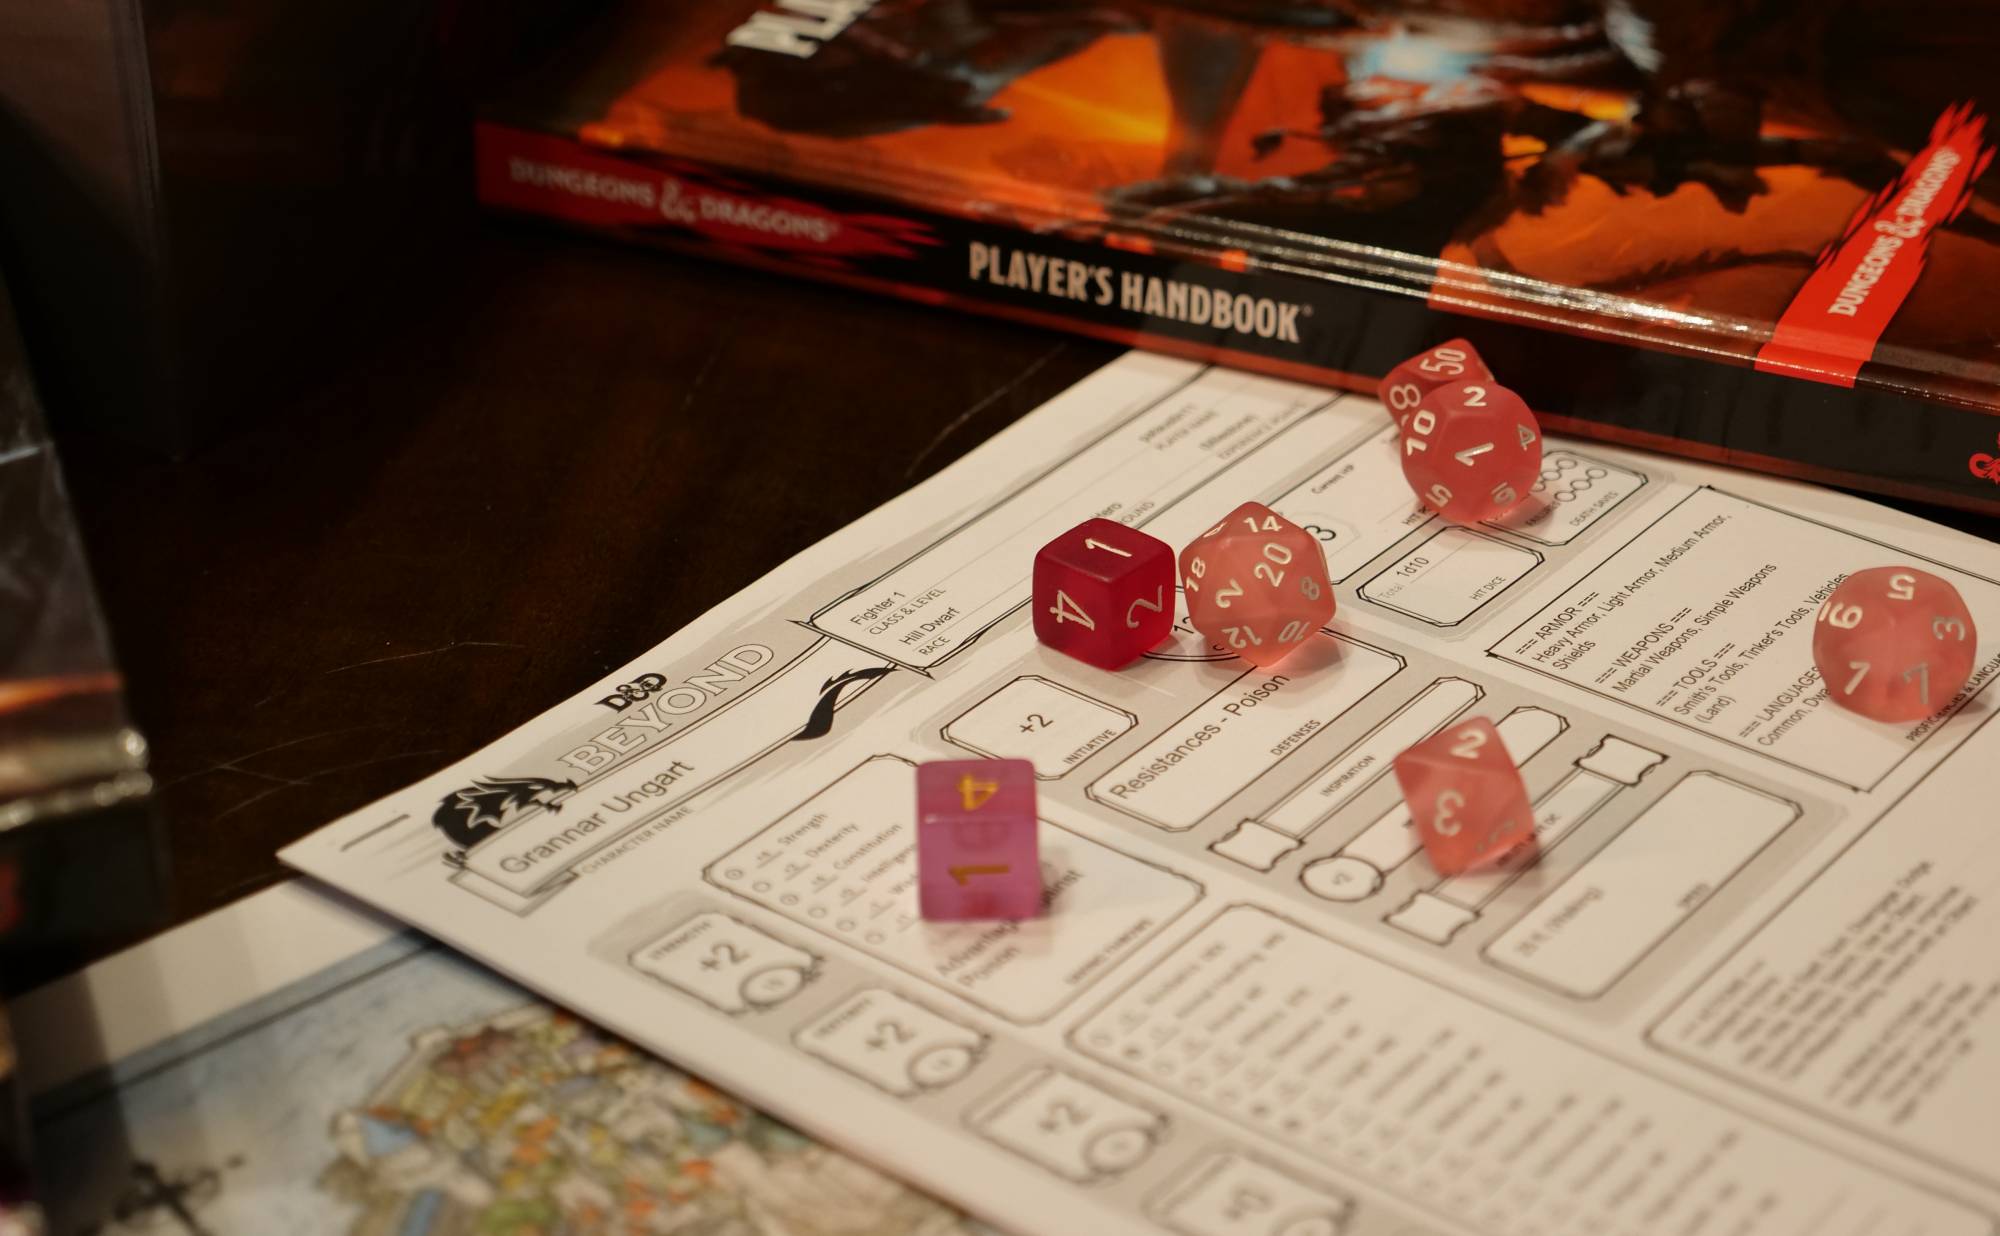 Pink and red dice resting on a character sheet next to a Dungeons and Dragons Player's Handbook.